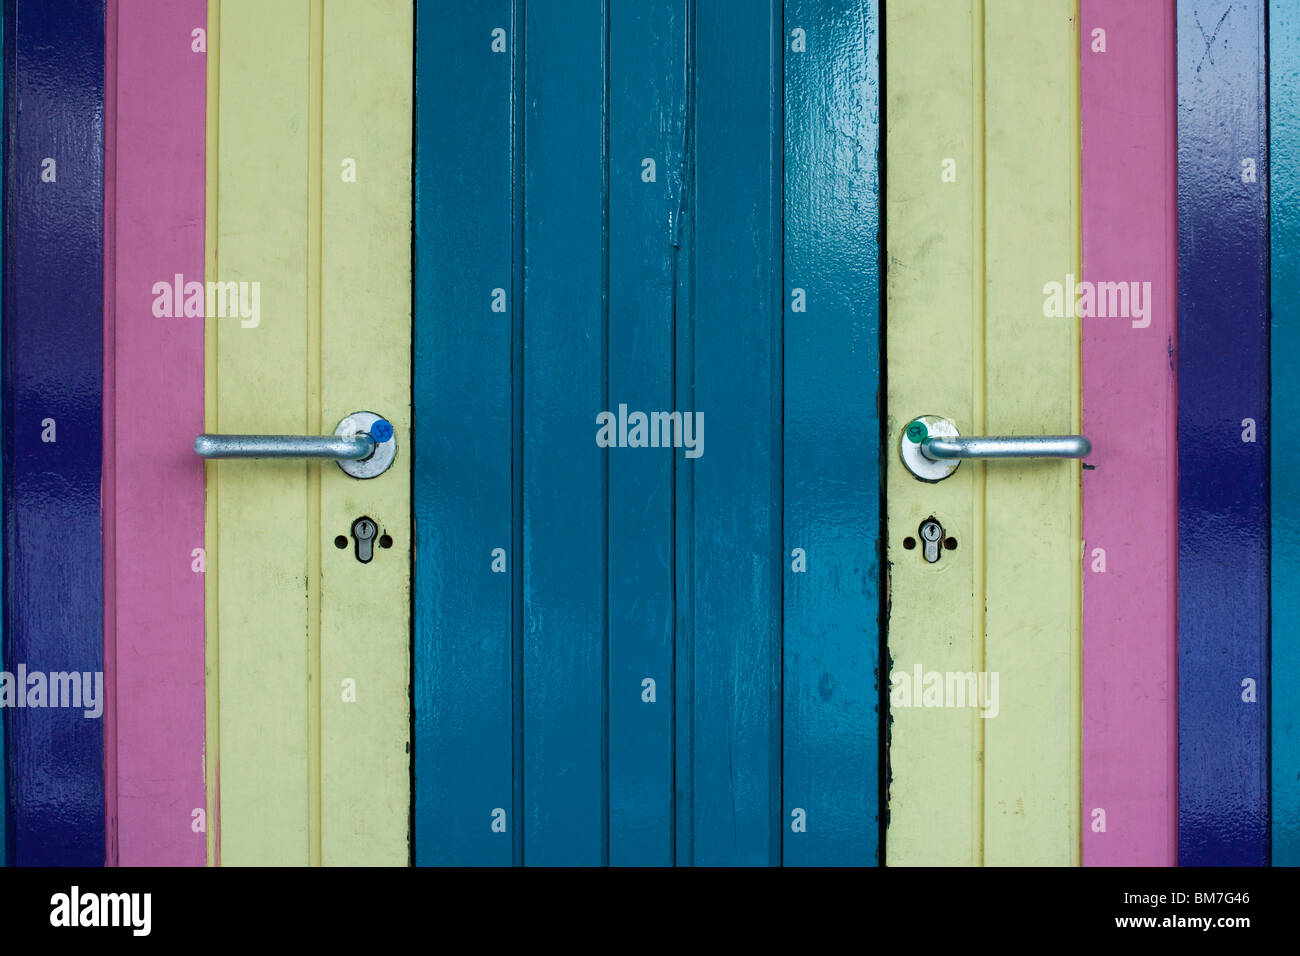 Detail of colorful painted doors Stock Photo